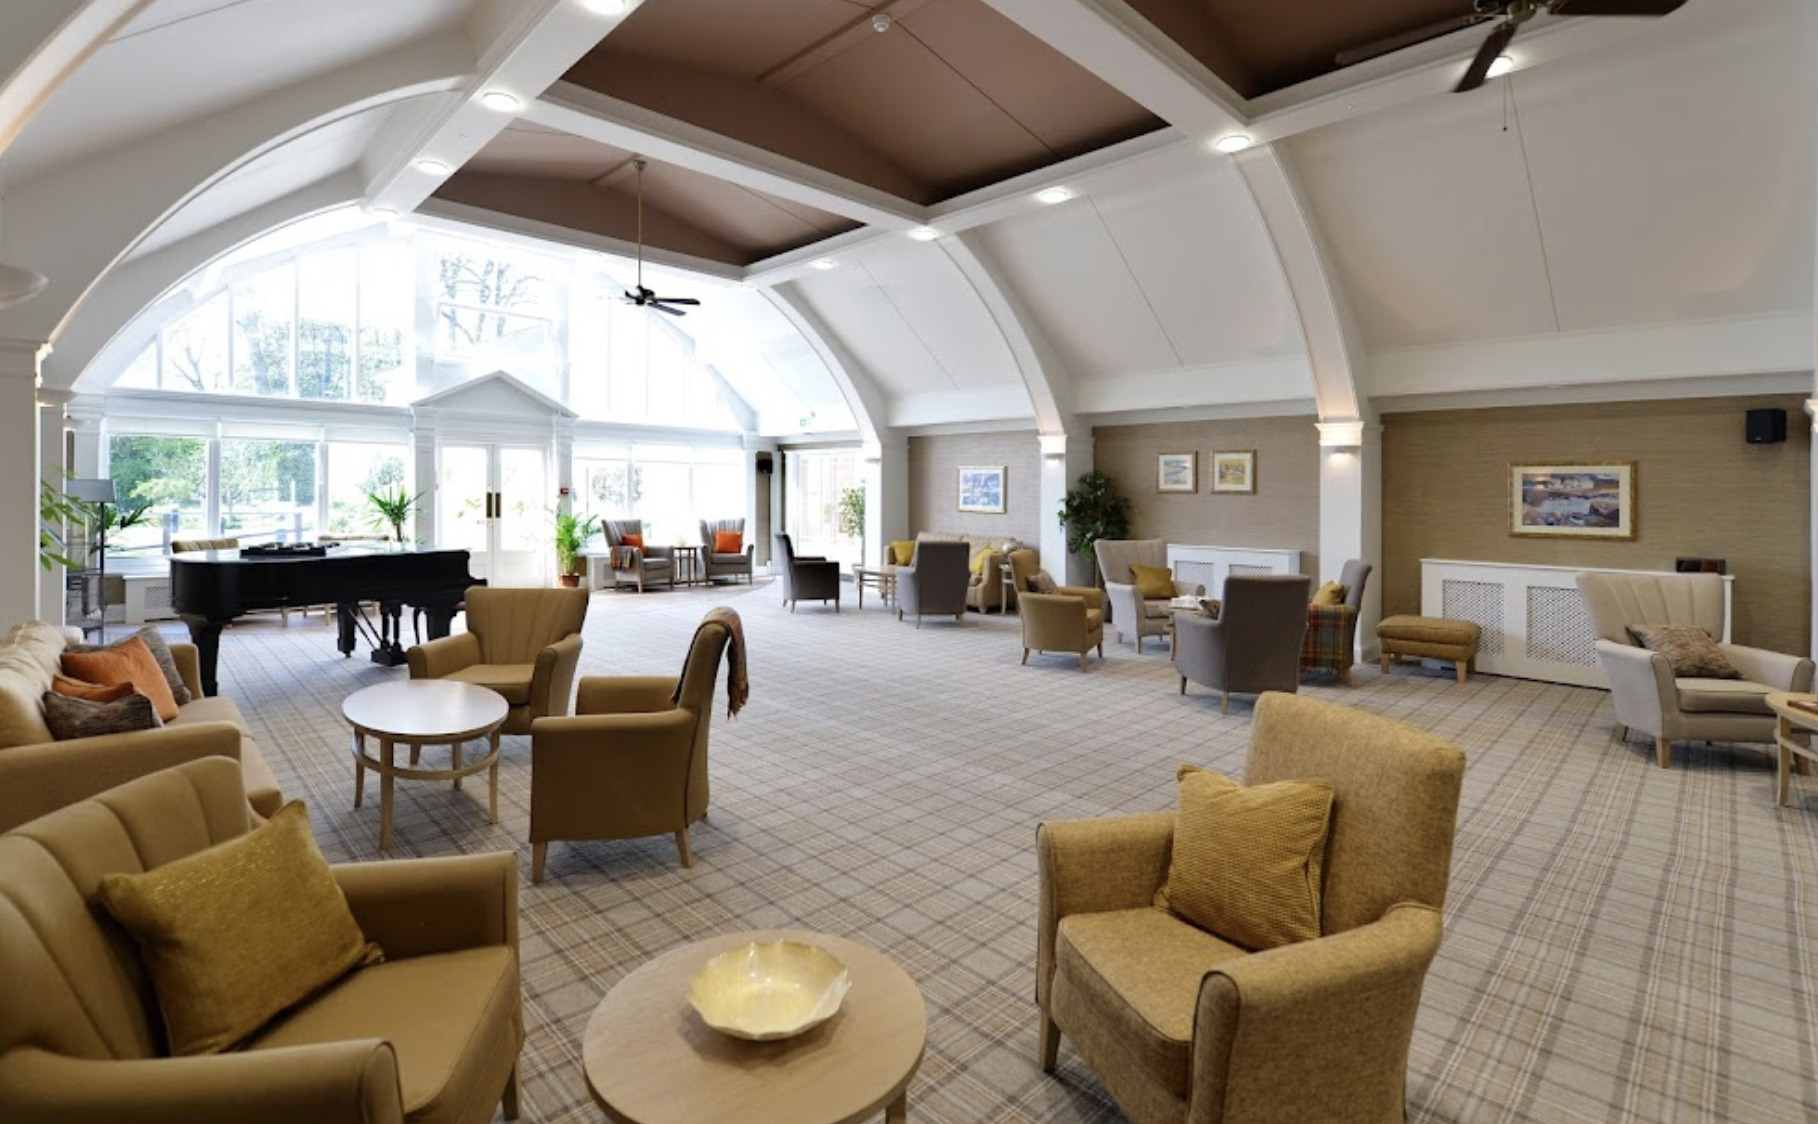 Bupa - Southlands care home 3